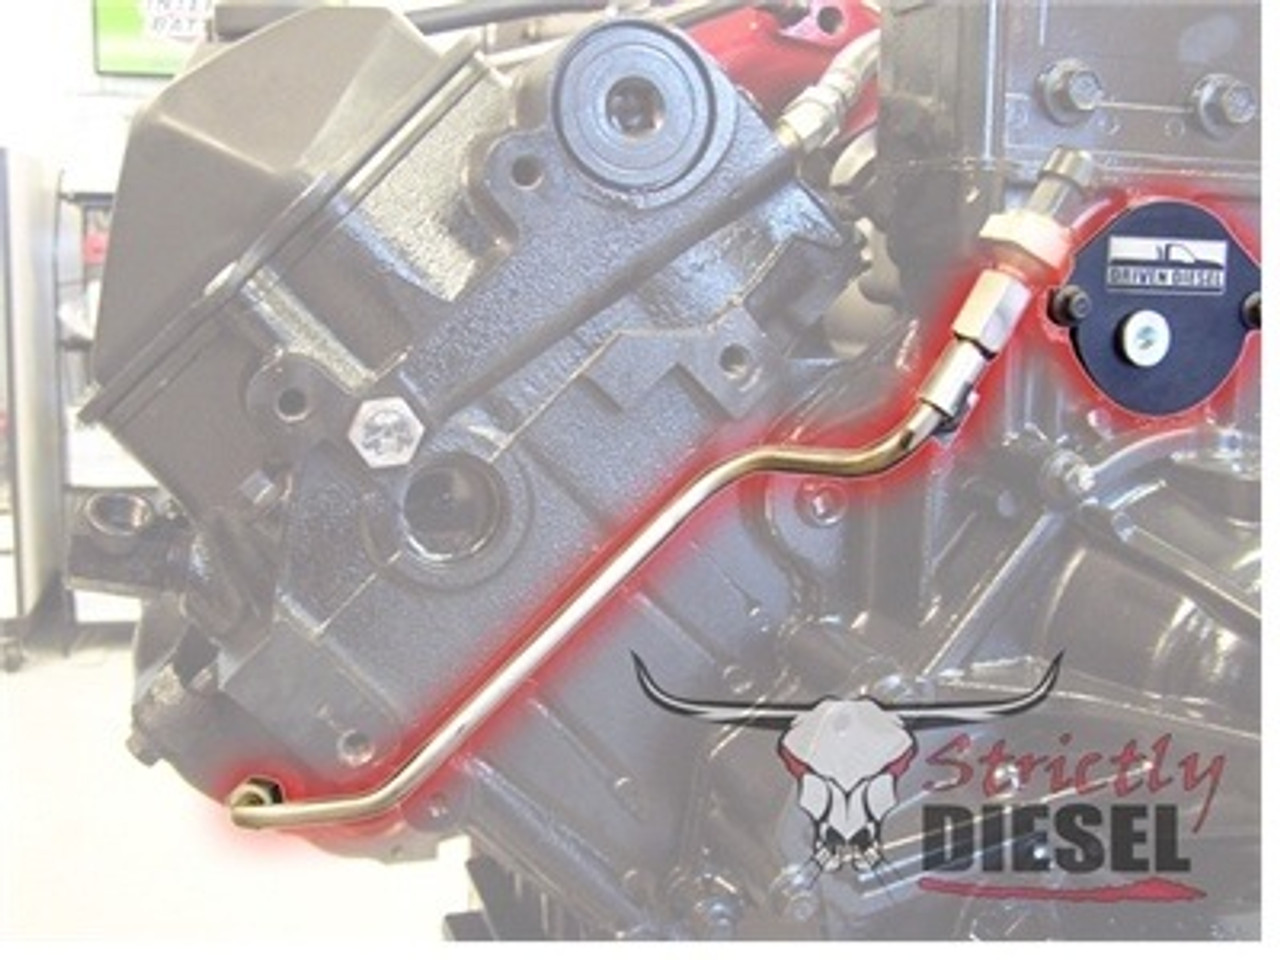 Driven Diesel HPOP Gear Access Cover Kit for Ford 7.3L Powerstroke (DD-73L-HPOPGearCoverKit) In Use View